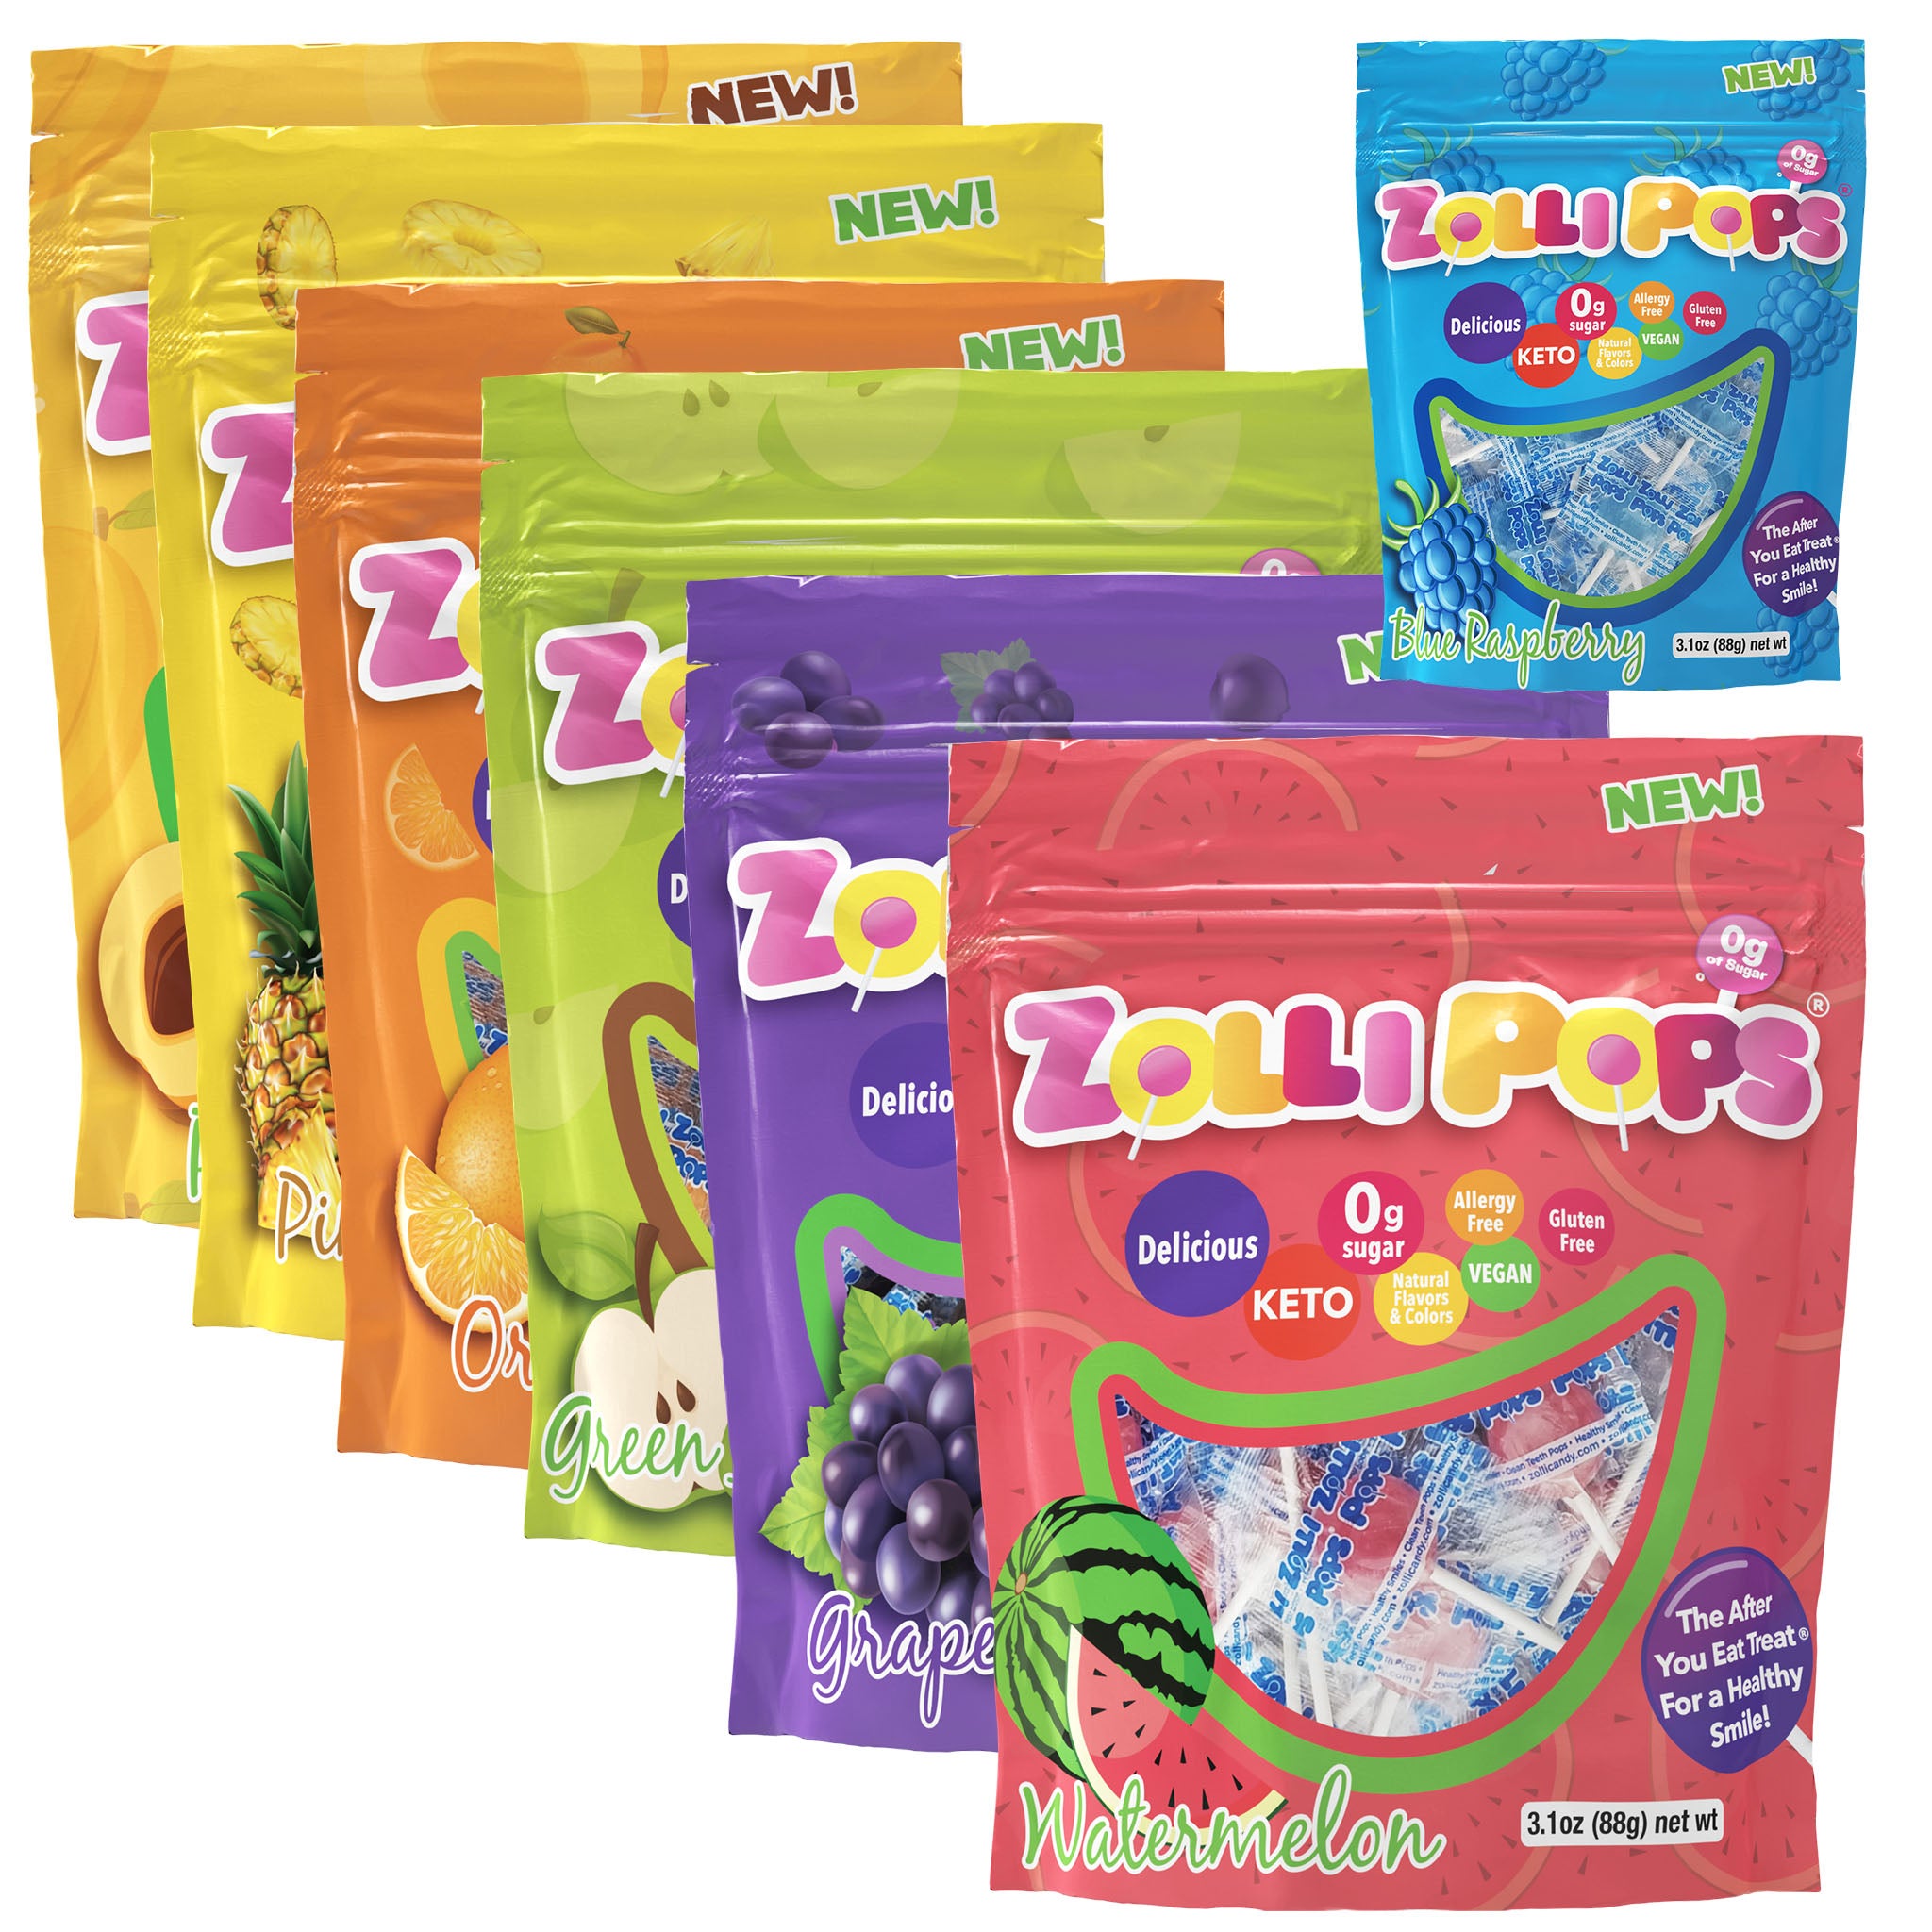 Zollipops Buy 6 Get One Free. Includes the flavors: Peach, Pineapple, Orange, Green Apple, Grape, Watermelon, and Blue Raspberry.